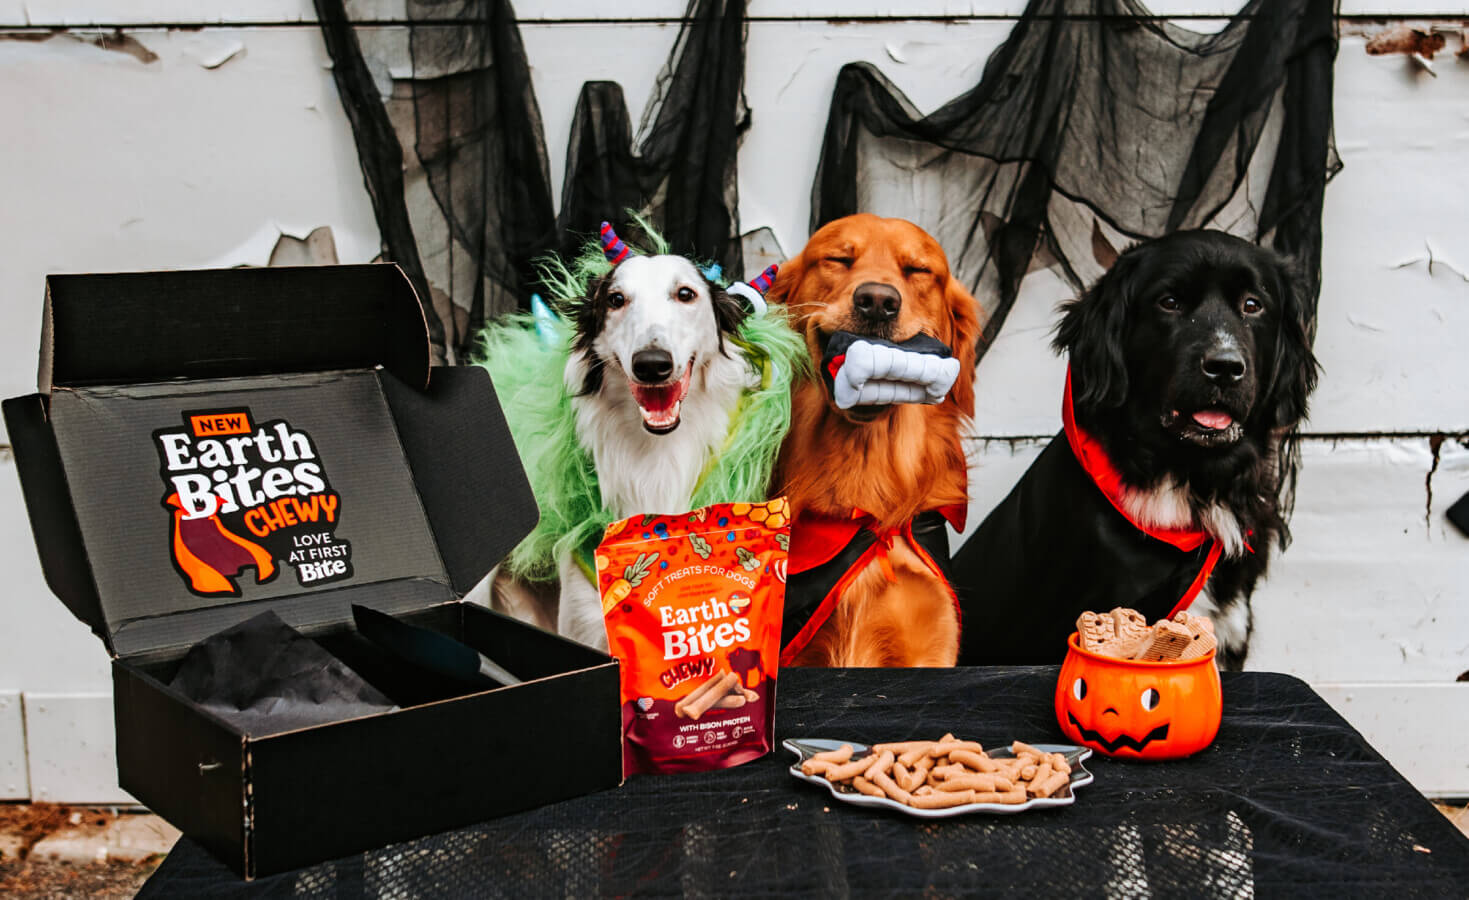 Three dogs in costumes sit next to a bag of EarthBites Chewy